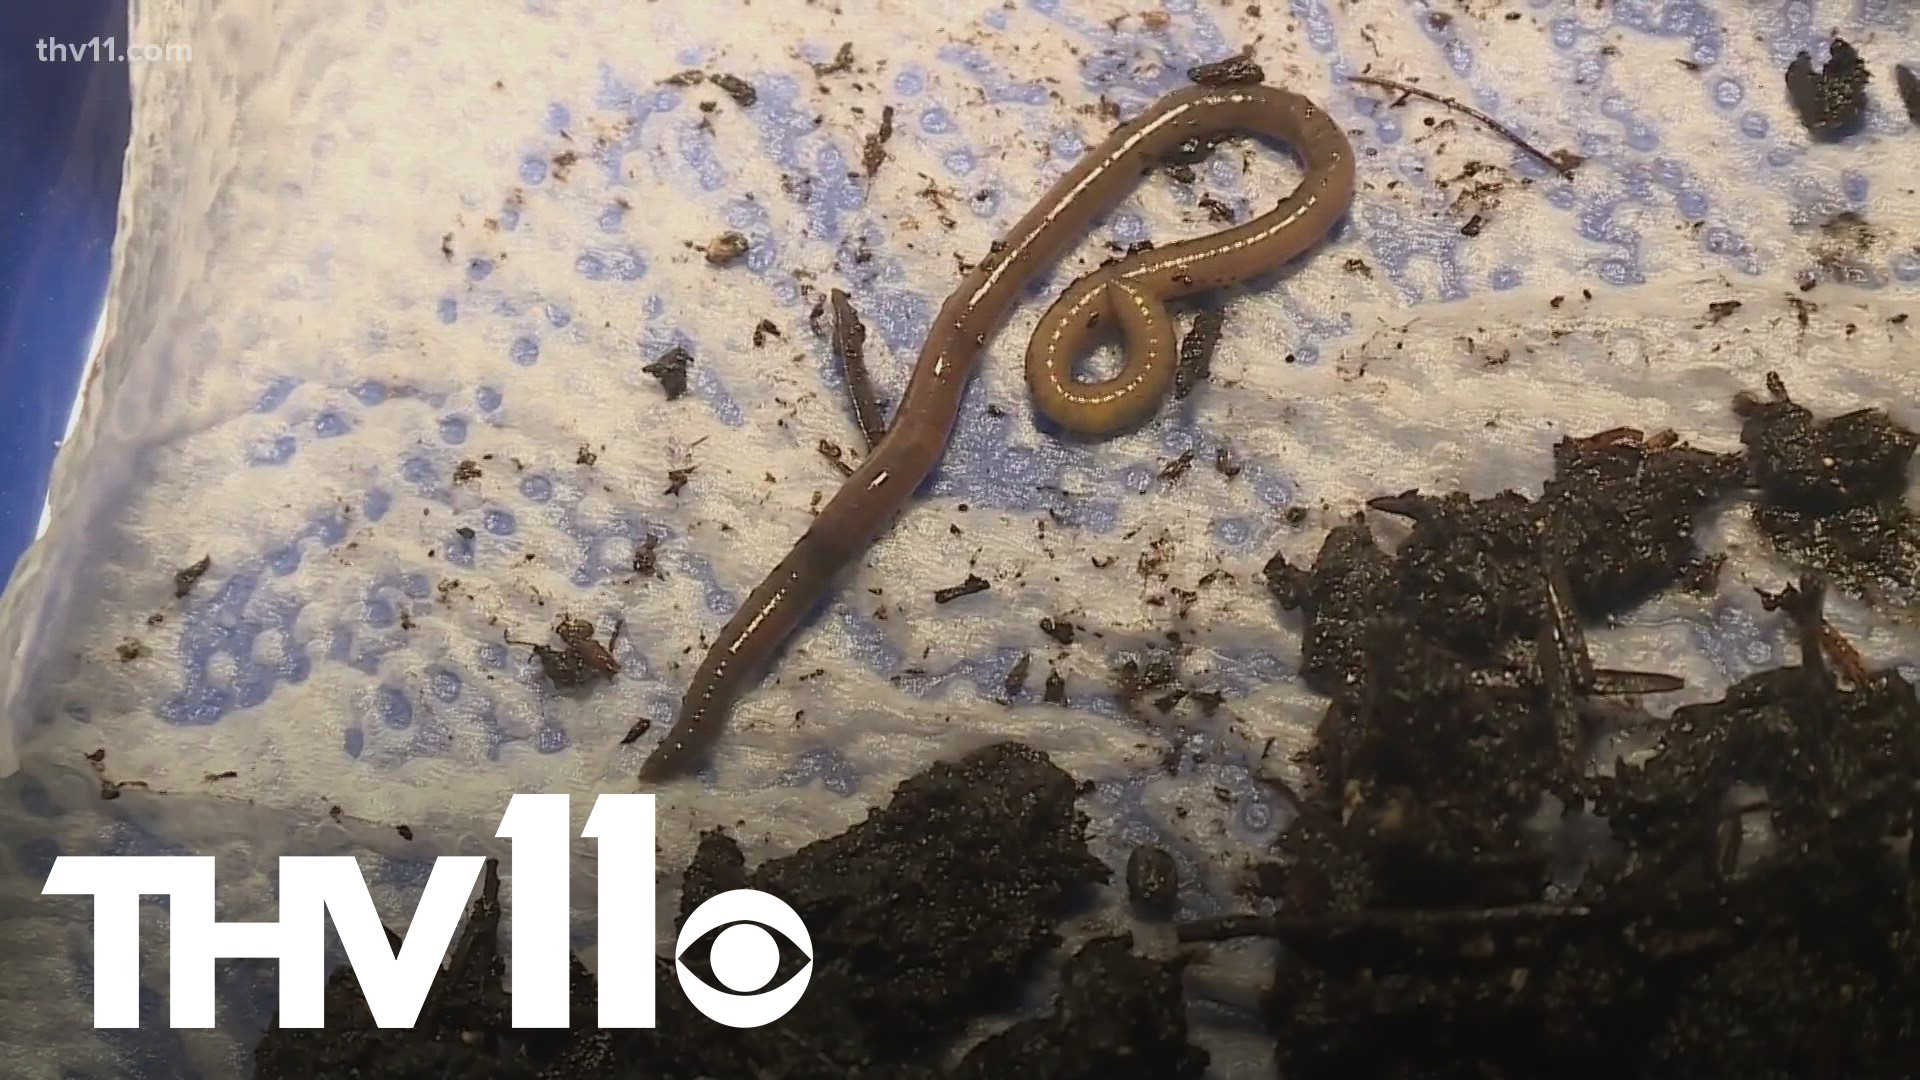 Experts in Arkansas say the jumping worm is an invasive earthworm that could cause problems. Here’s what to know about them.